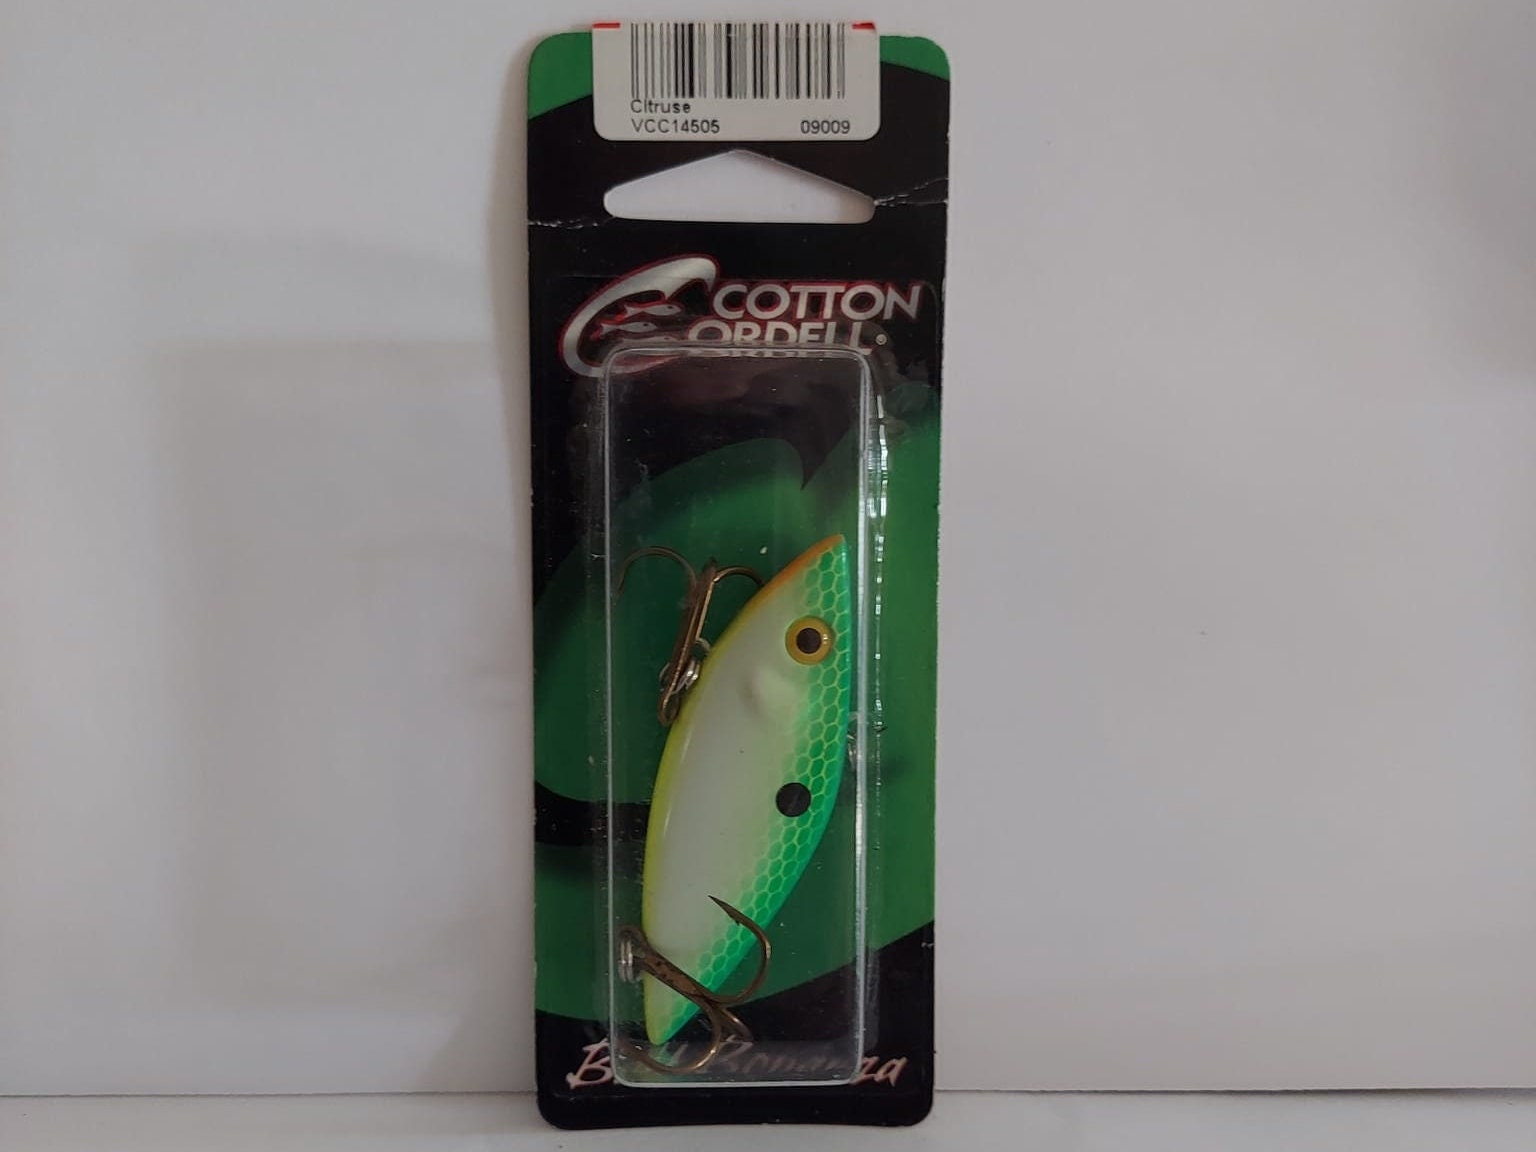 Cotton Cordell CC Citruse VCC14505 White and Green Fishing Lure, Fishing  Home Decor Fisherman Gift Dad Gift for Him 